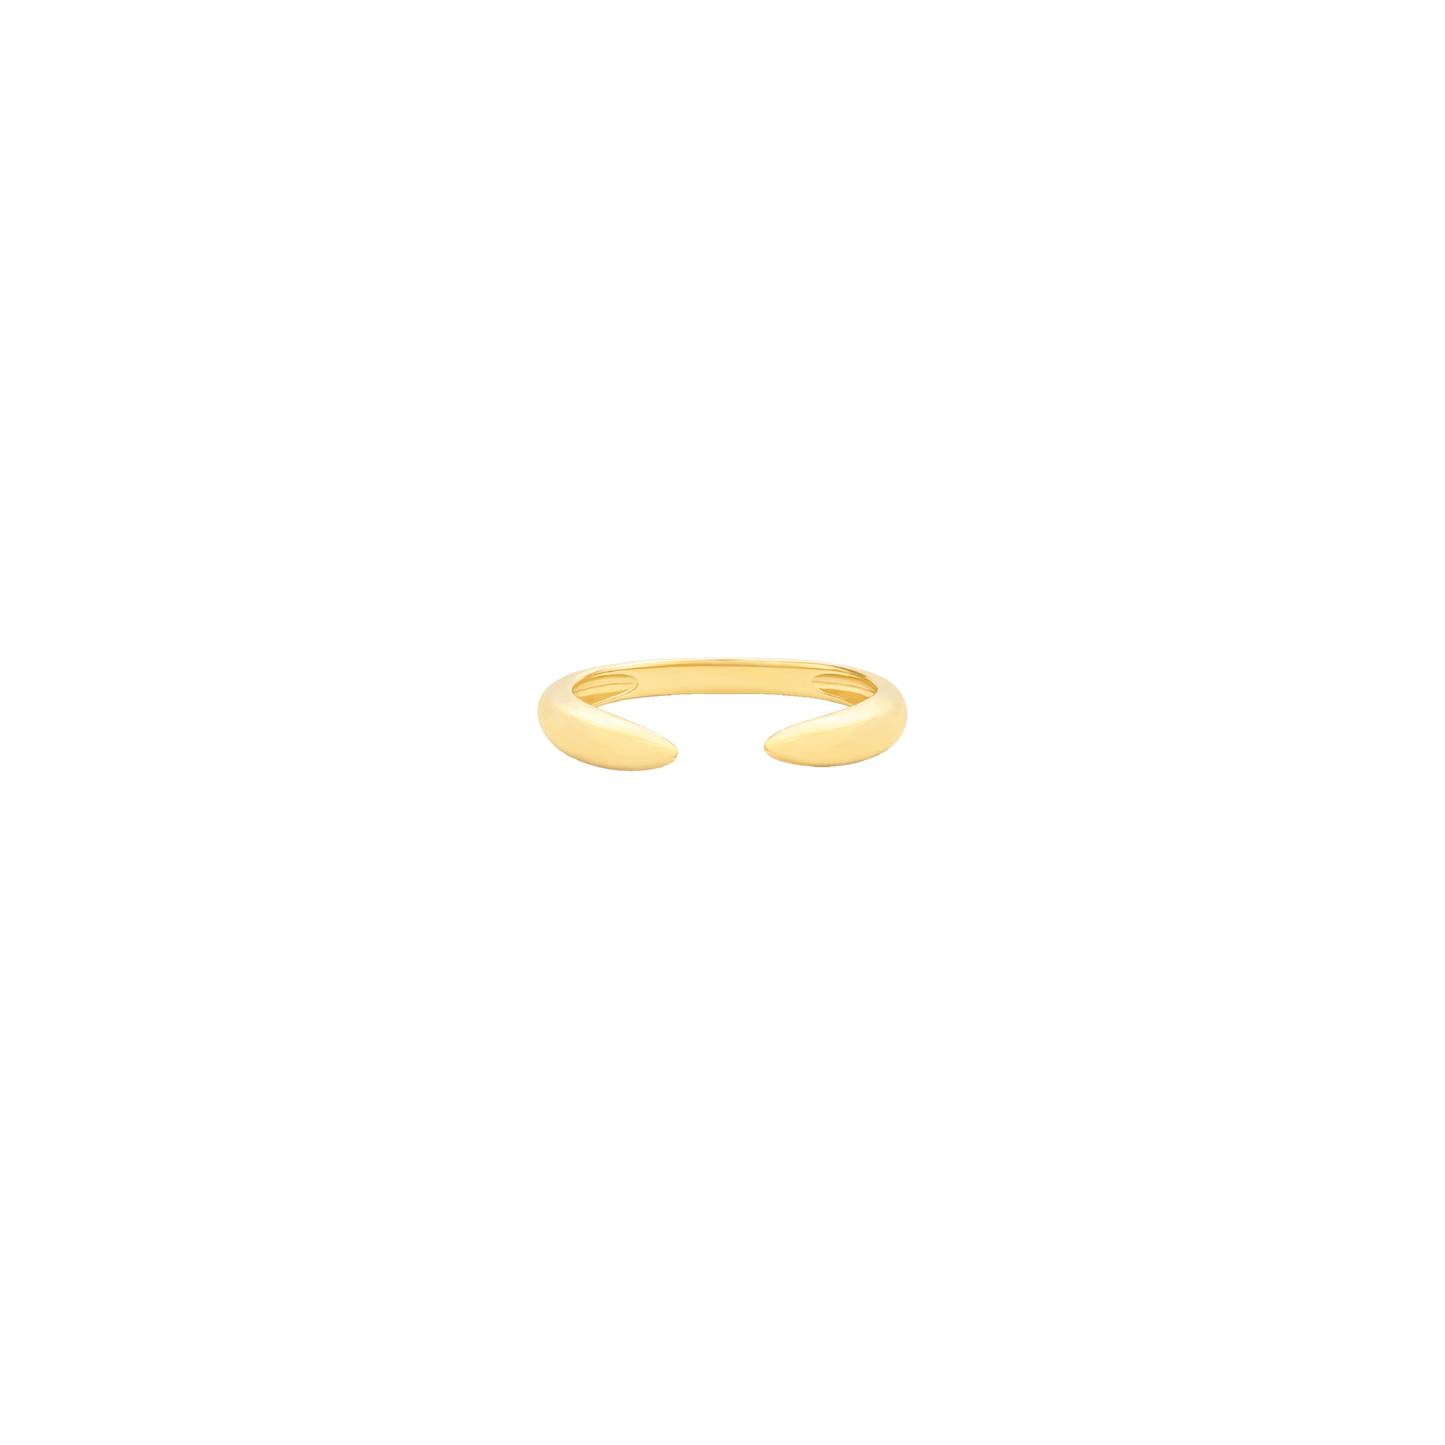 Solid Gold Claw Ring - 14K Yellow Gold Rings 14K Solid Gold US 4 